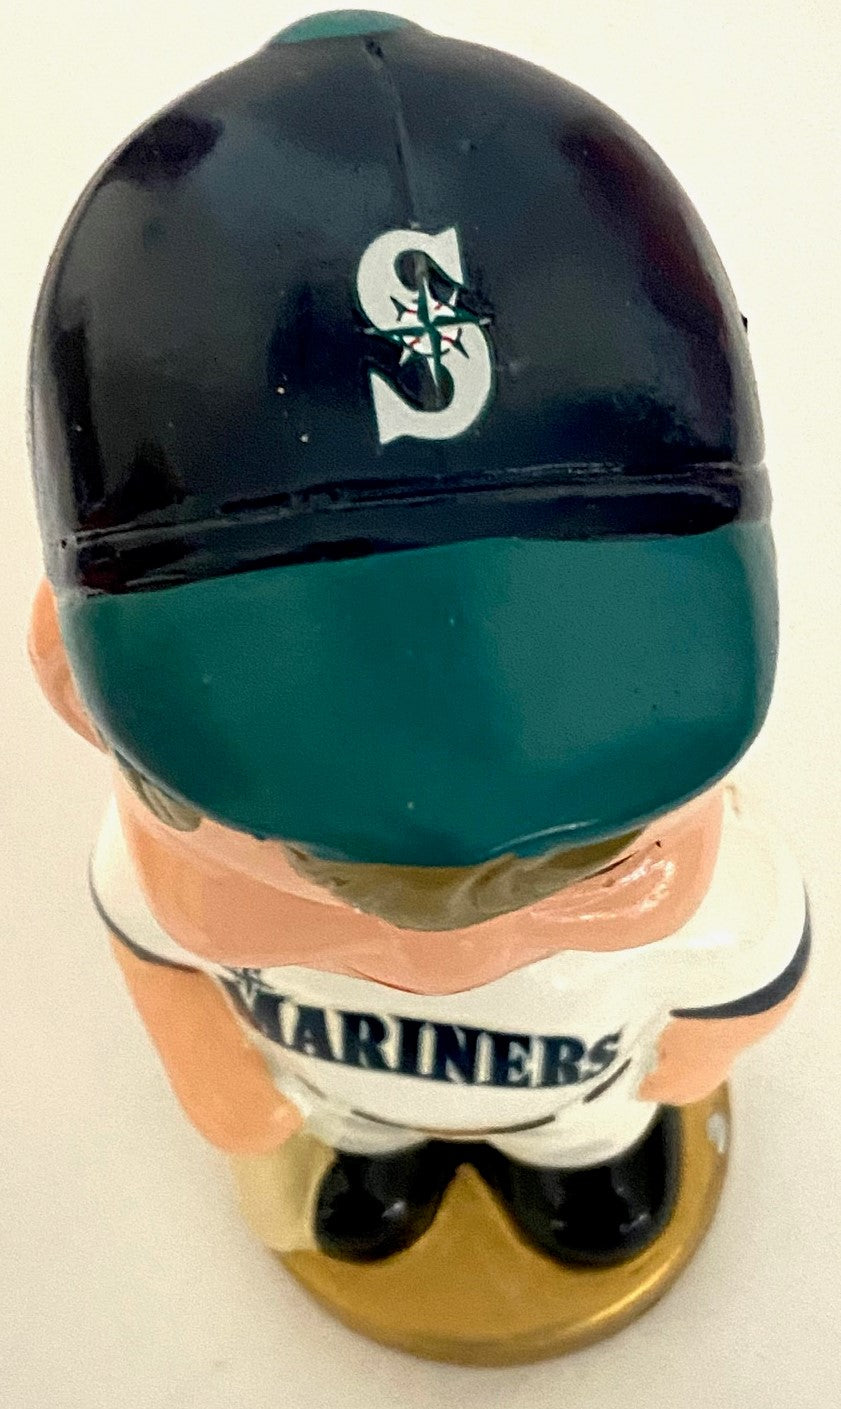 Seattle Mariners 2002 MLB "Boy" Bobblehead (New/2 Blemishes) by Twins Enterprise